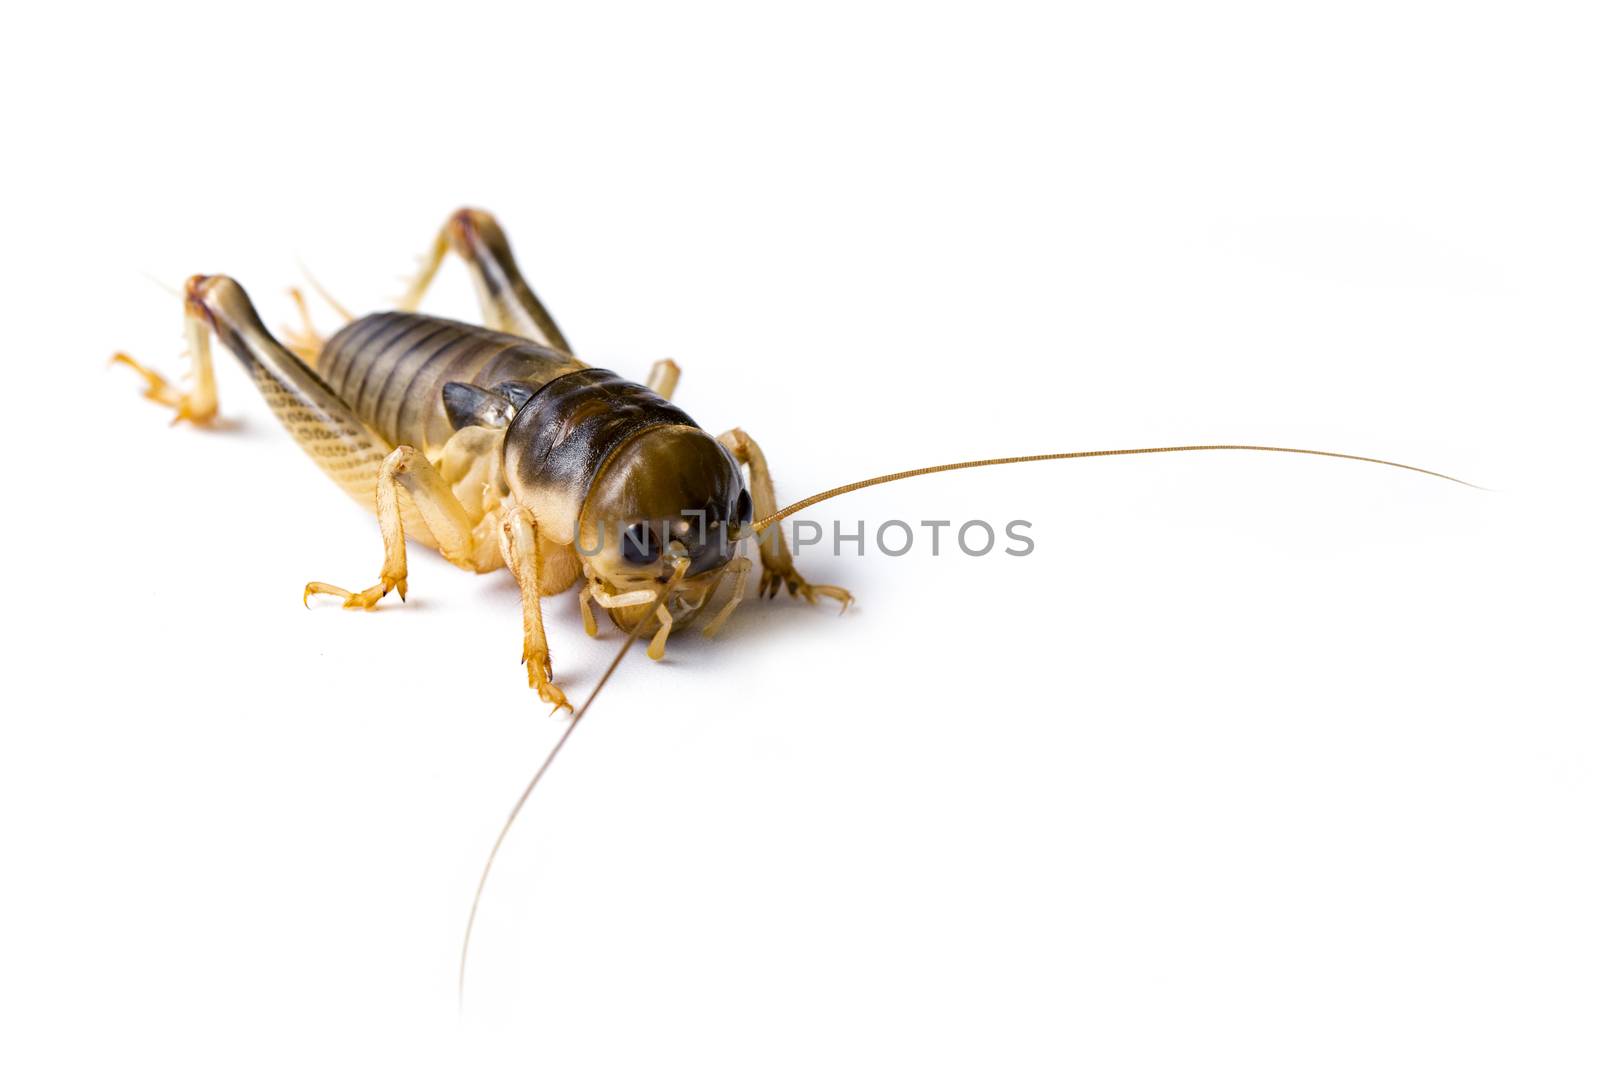 Image of cricket on white background., Insects. Animals by yod67